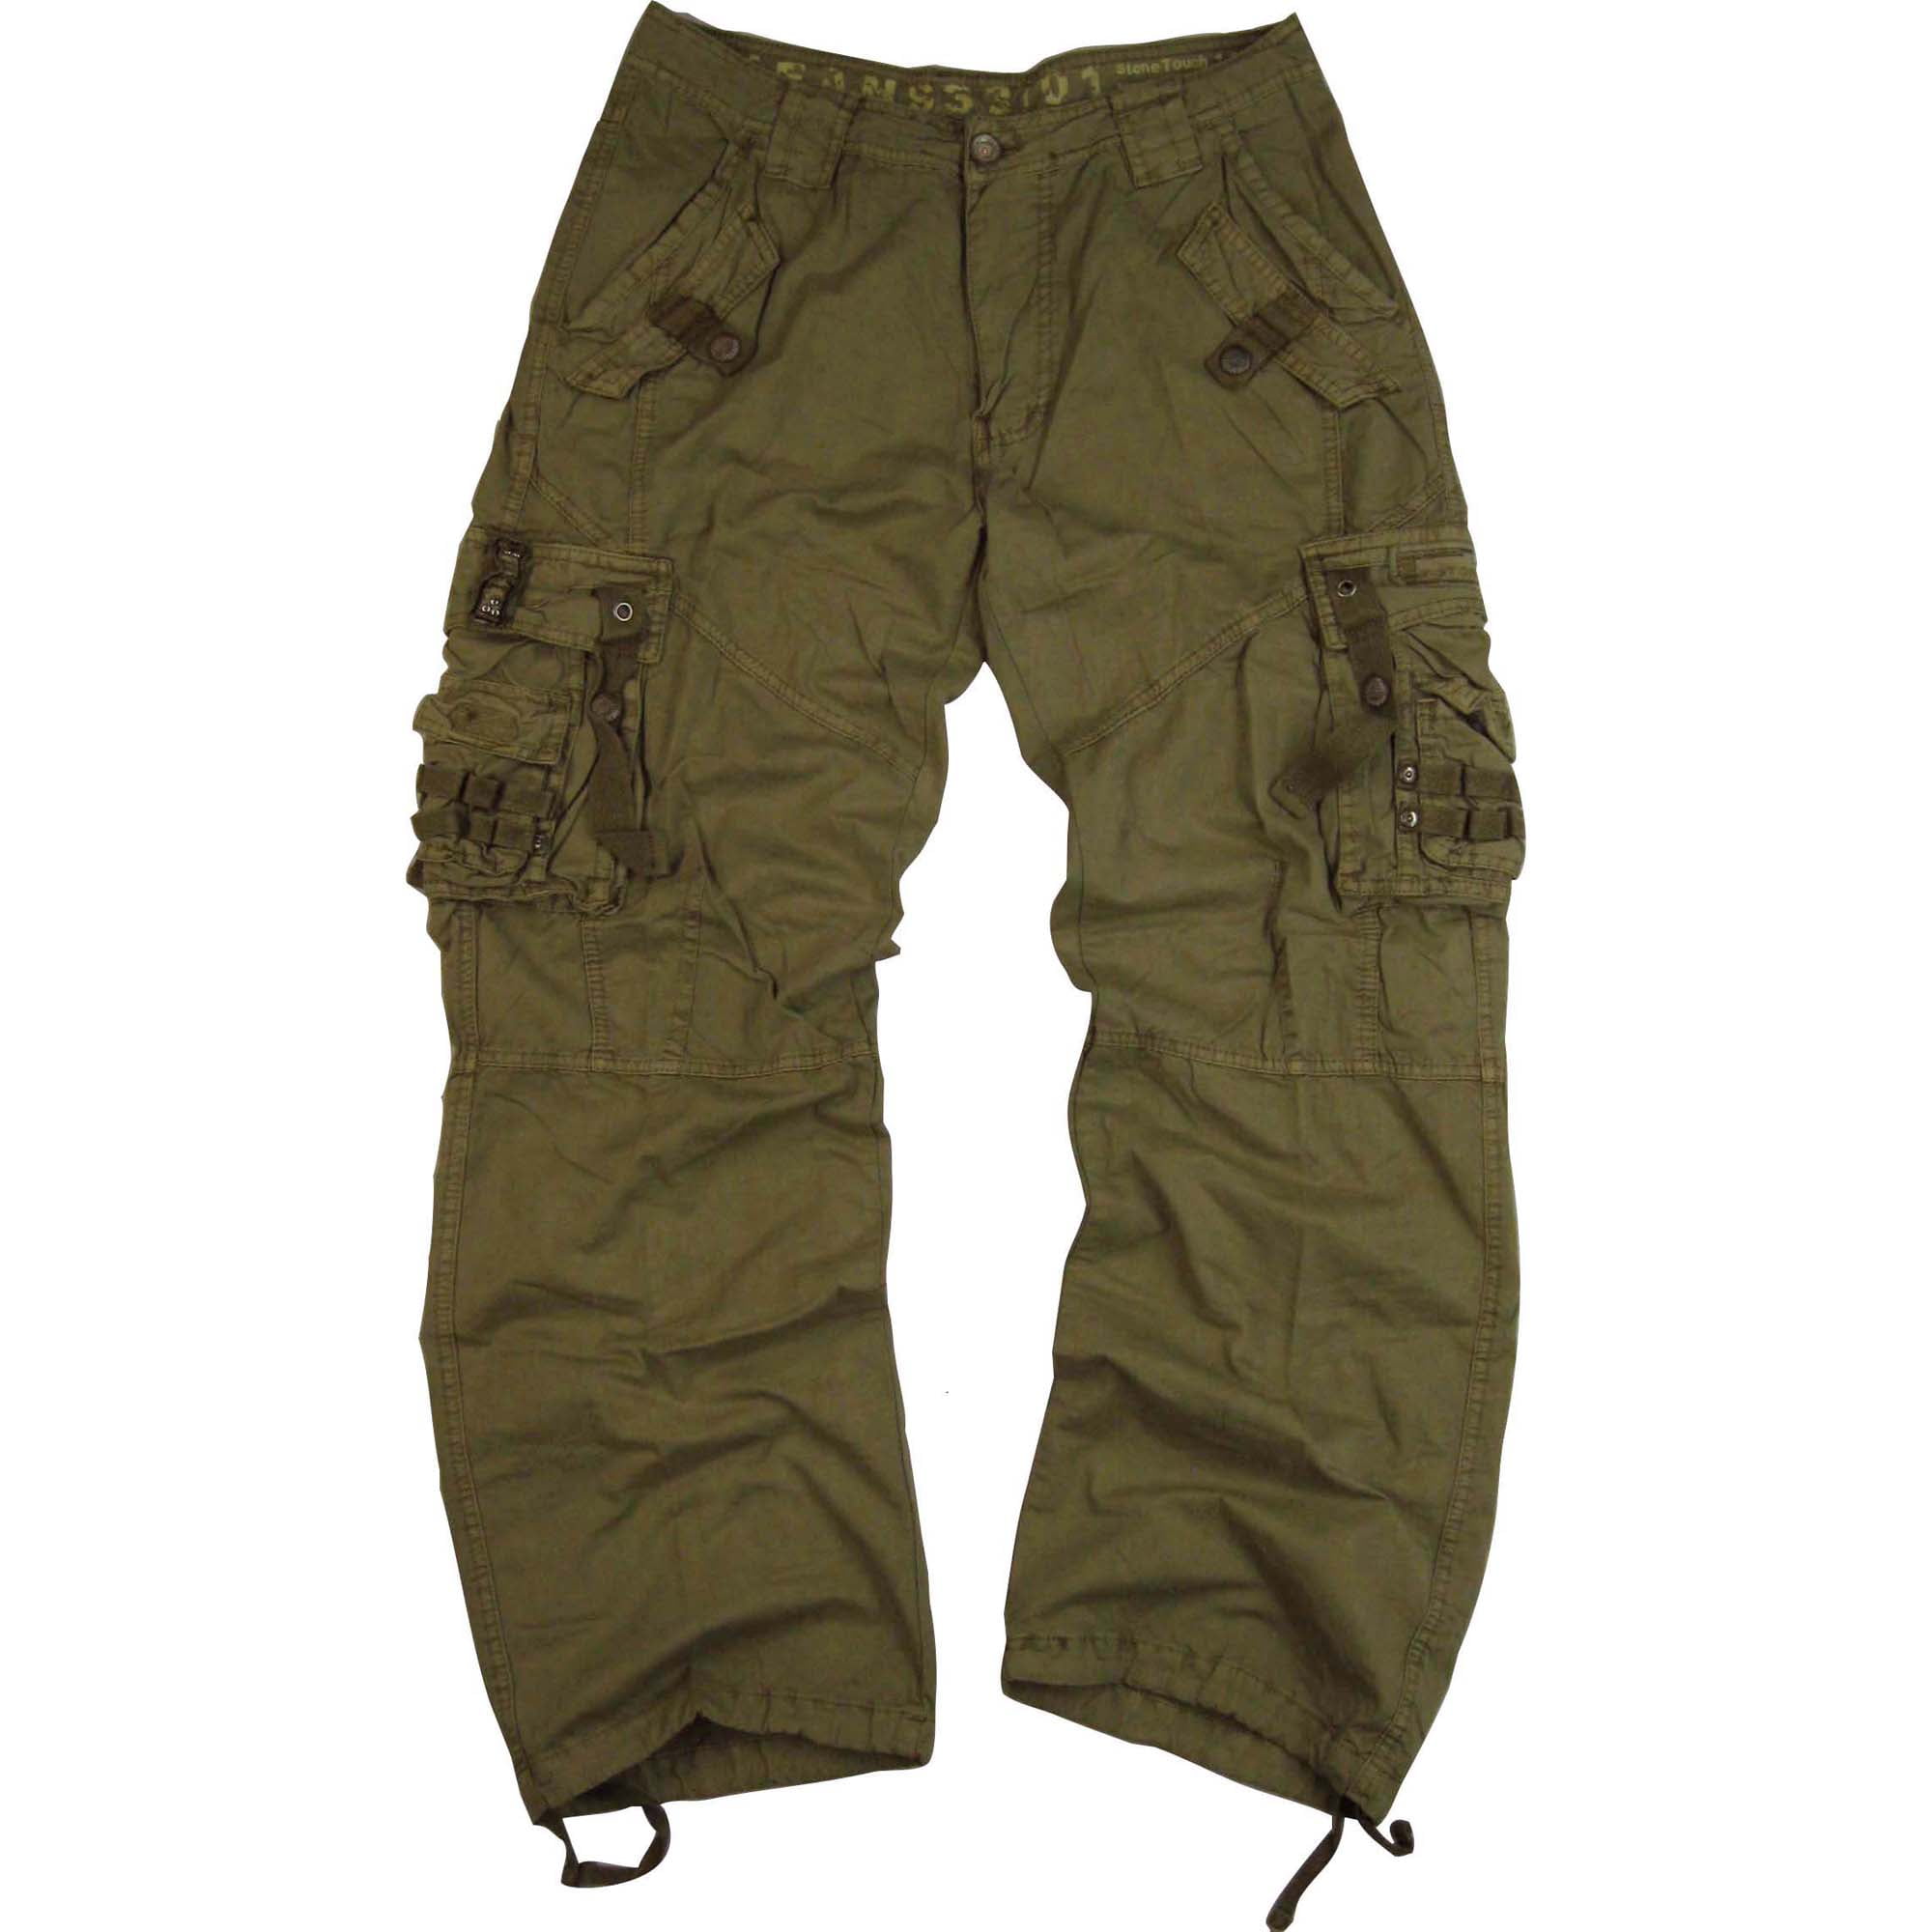 Mens Army Cargo Pants - Army Military